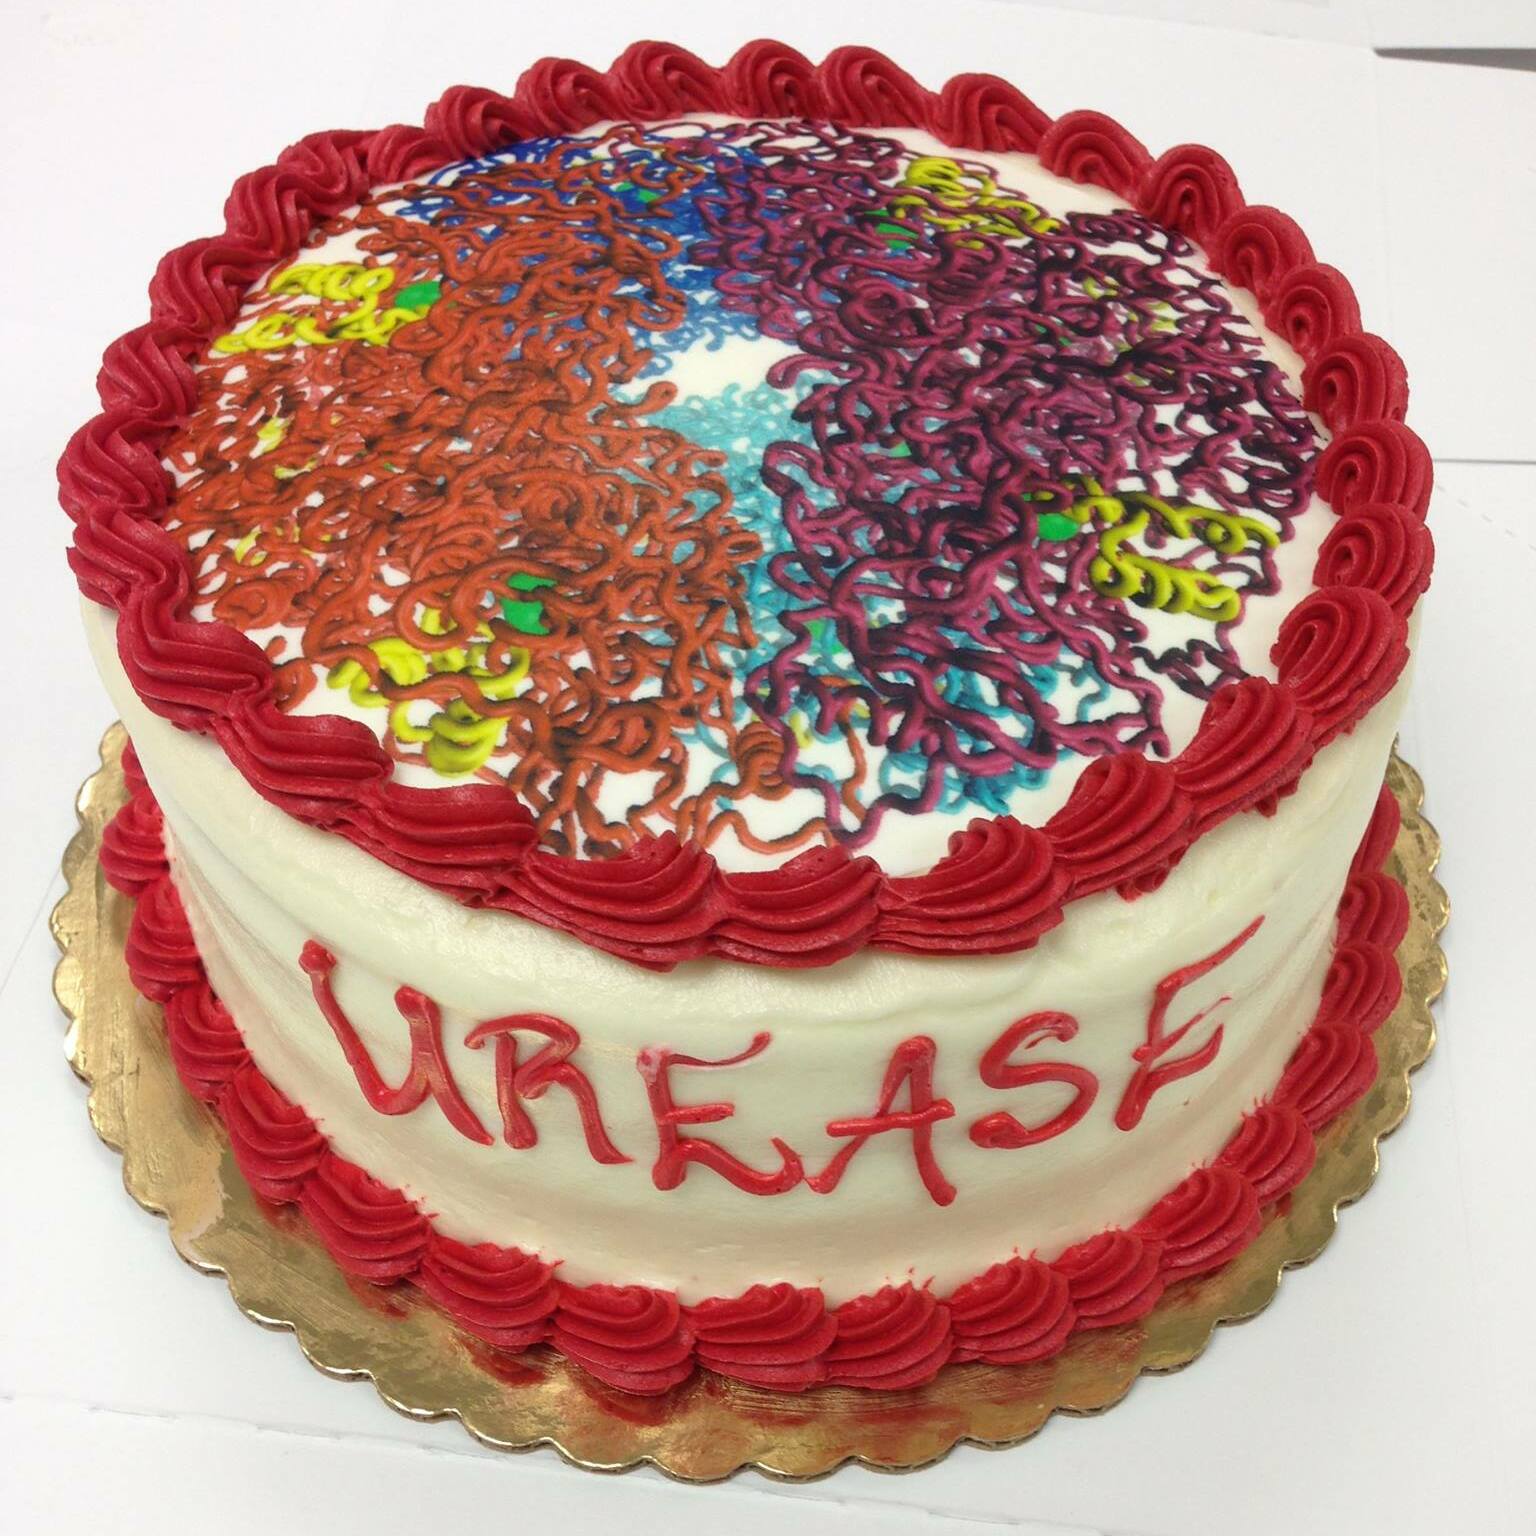 A picture of a white and red cake. On top is an intricate design showing the protein structure of Urease in multi-colored frosting. Written in red on the side it reads, “Urease”